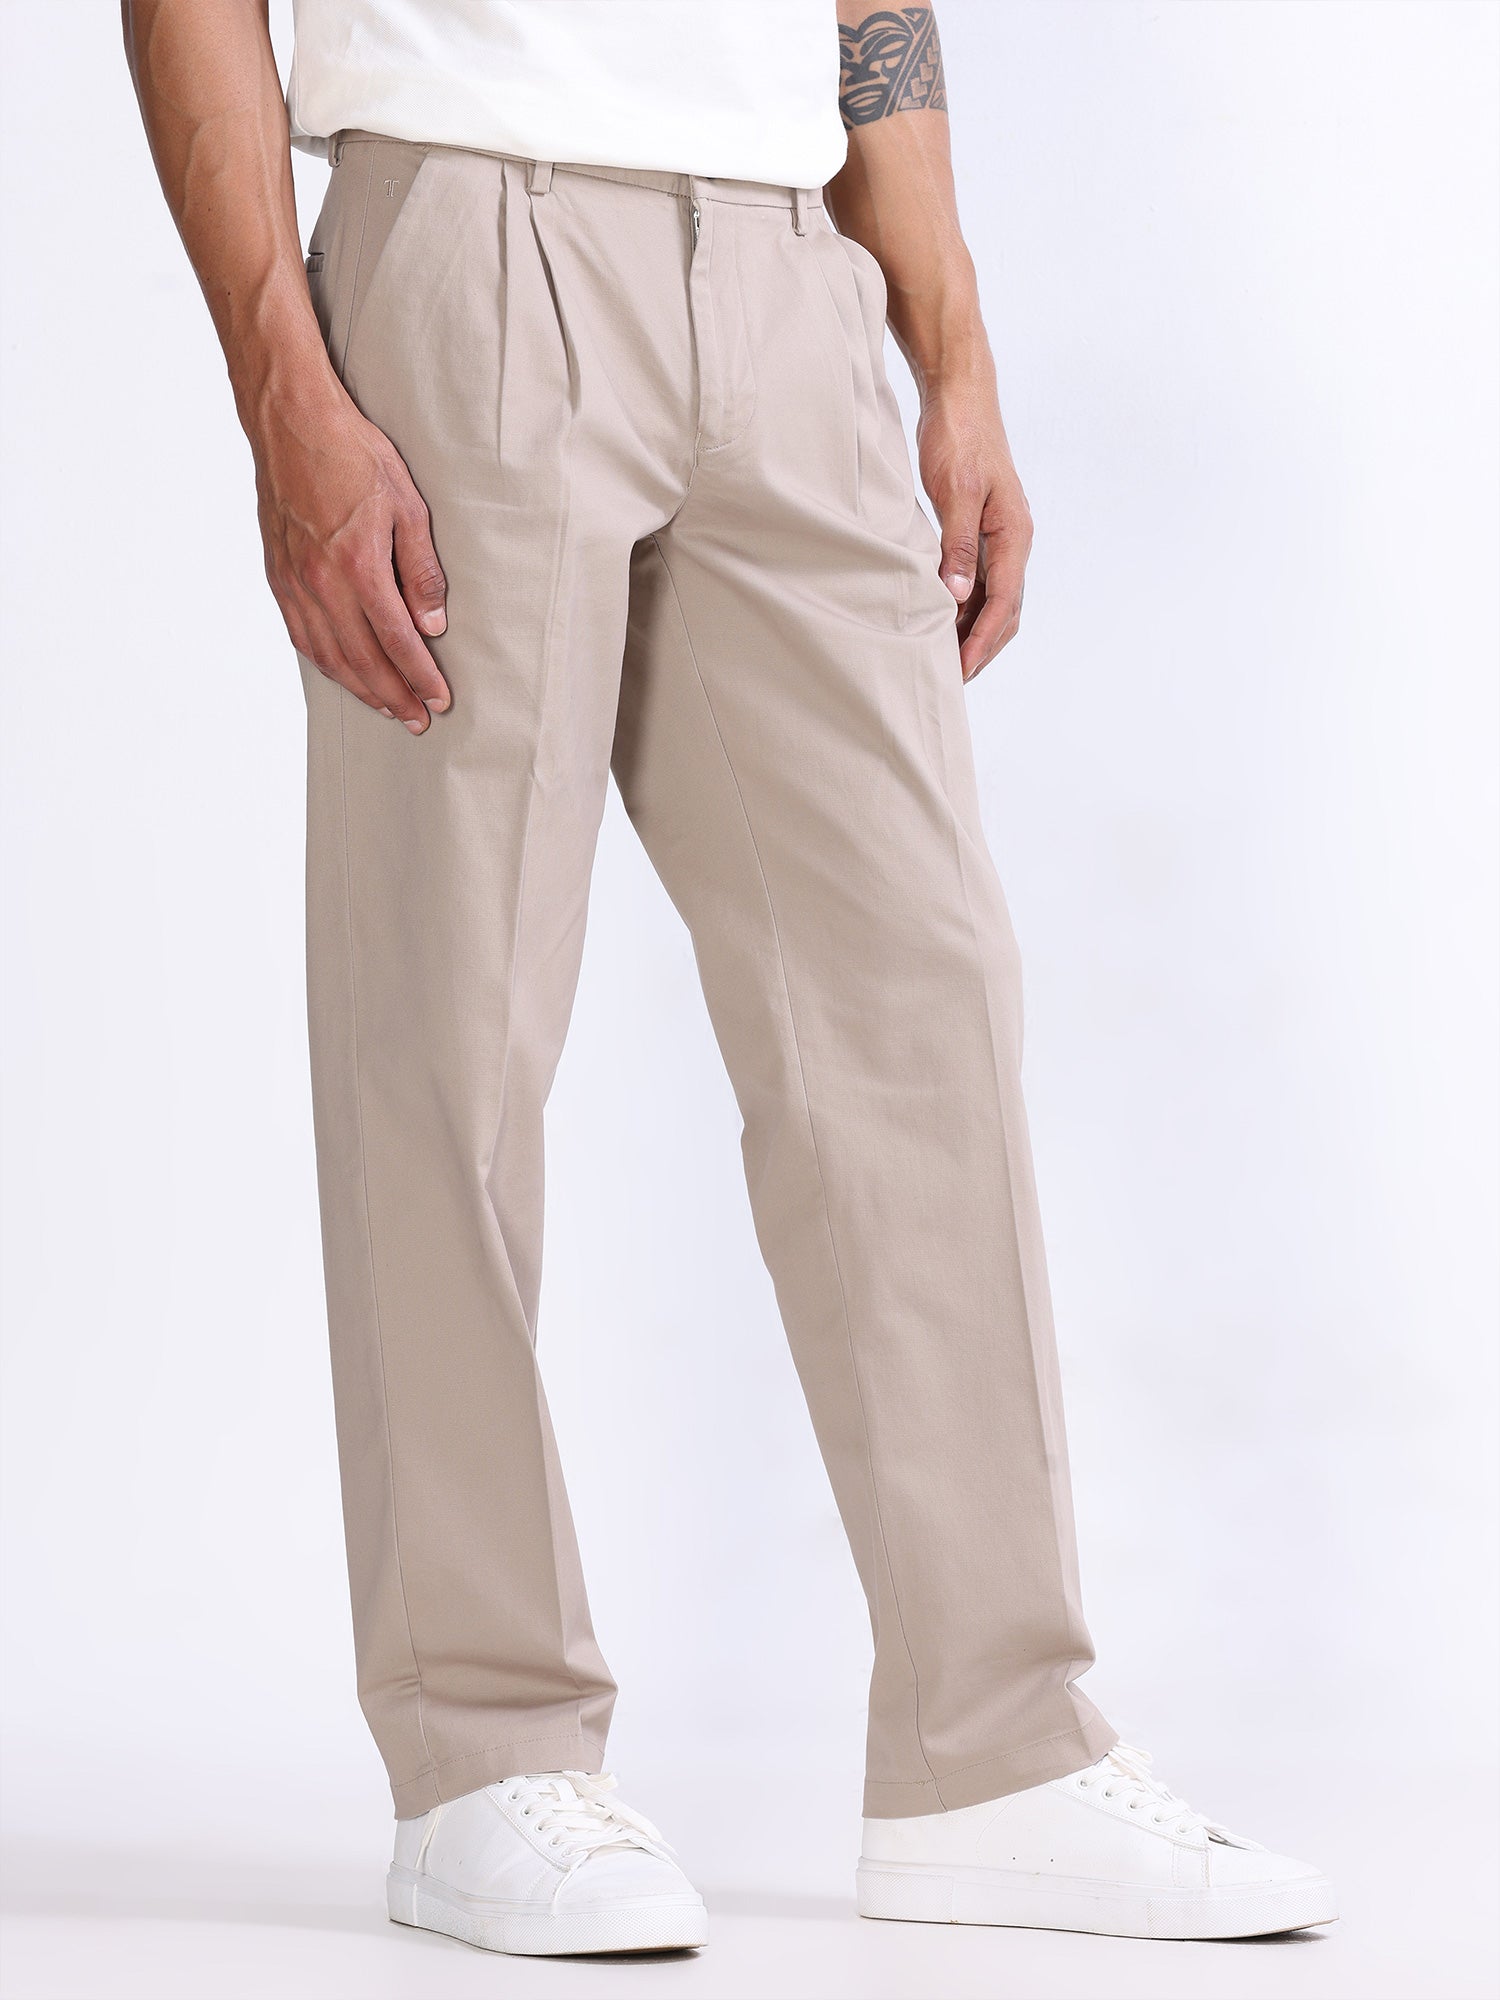 V1 CARGO PANTS | COLD CULTURE™ | STREETWEAR CLOTHING BRAND